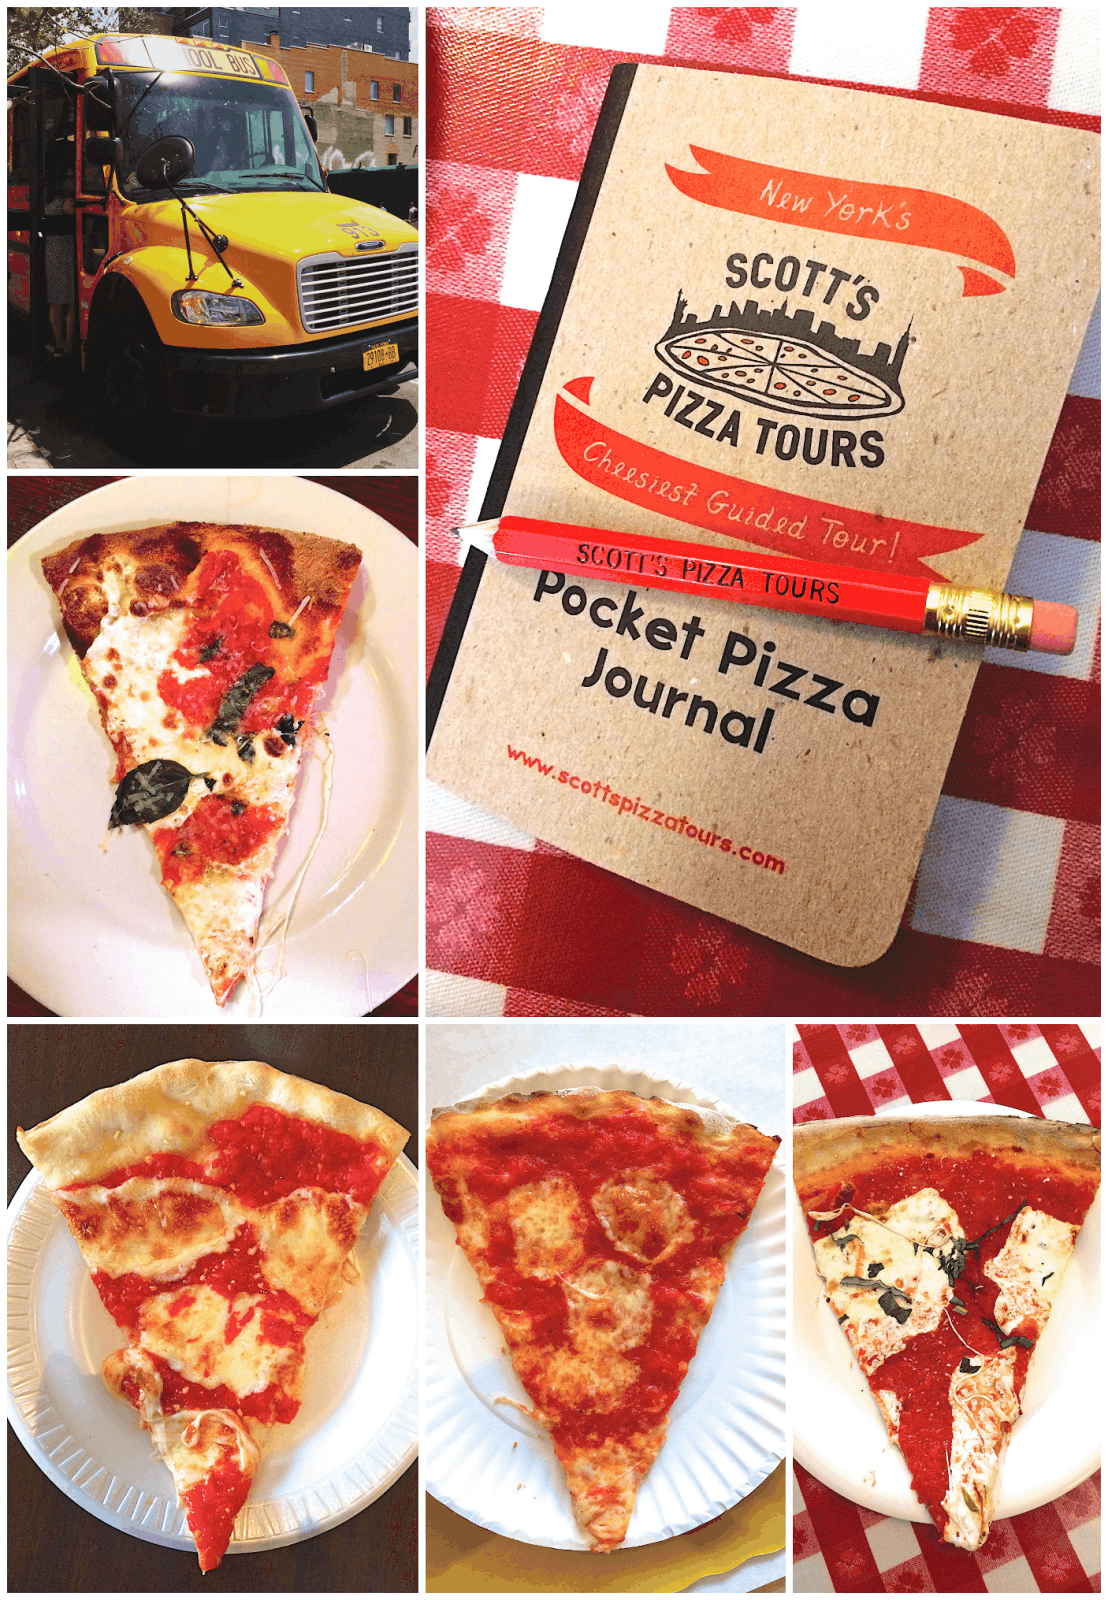 Scott's Pizza Tour NYC - a must do activity on your next trip to New York City. Do a walking tour or the Sunday bus tour. Great way to sample tons of delicious NY Pizza!